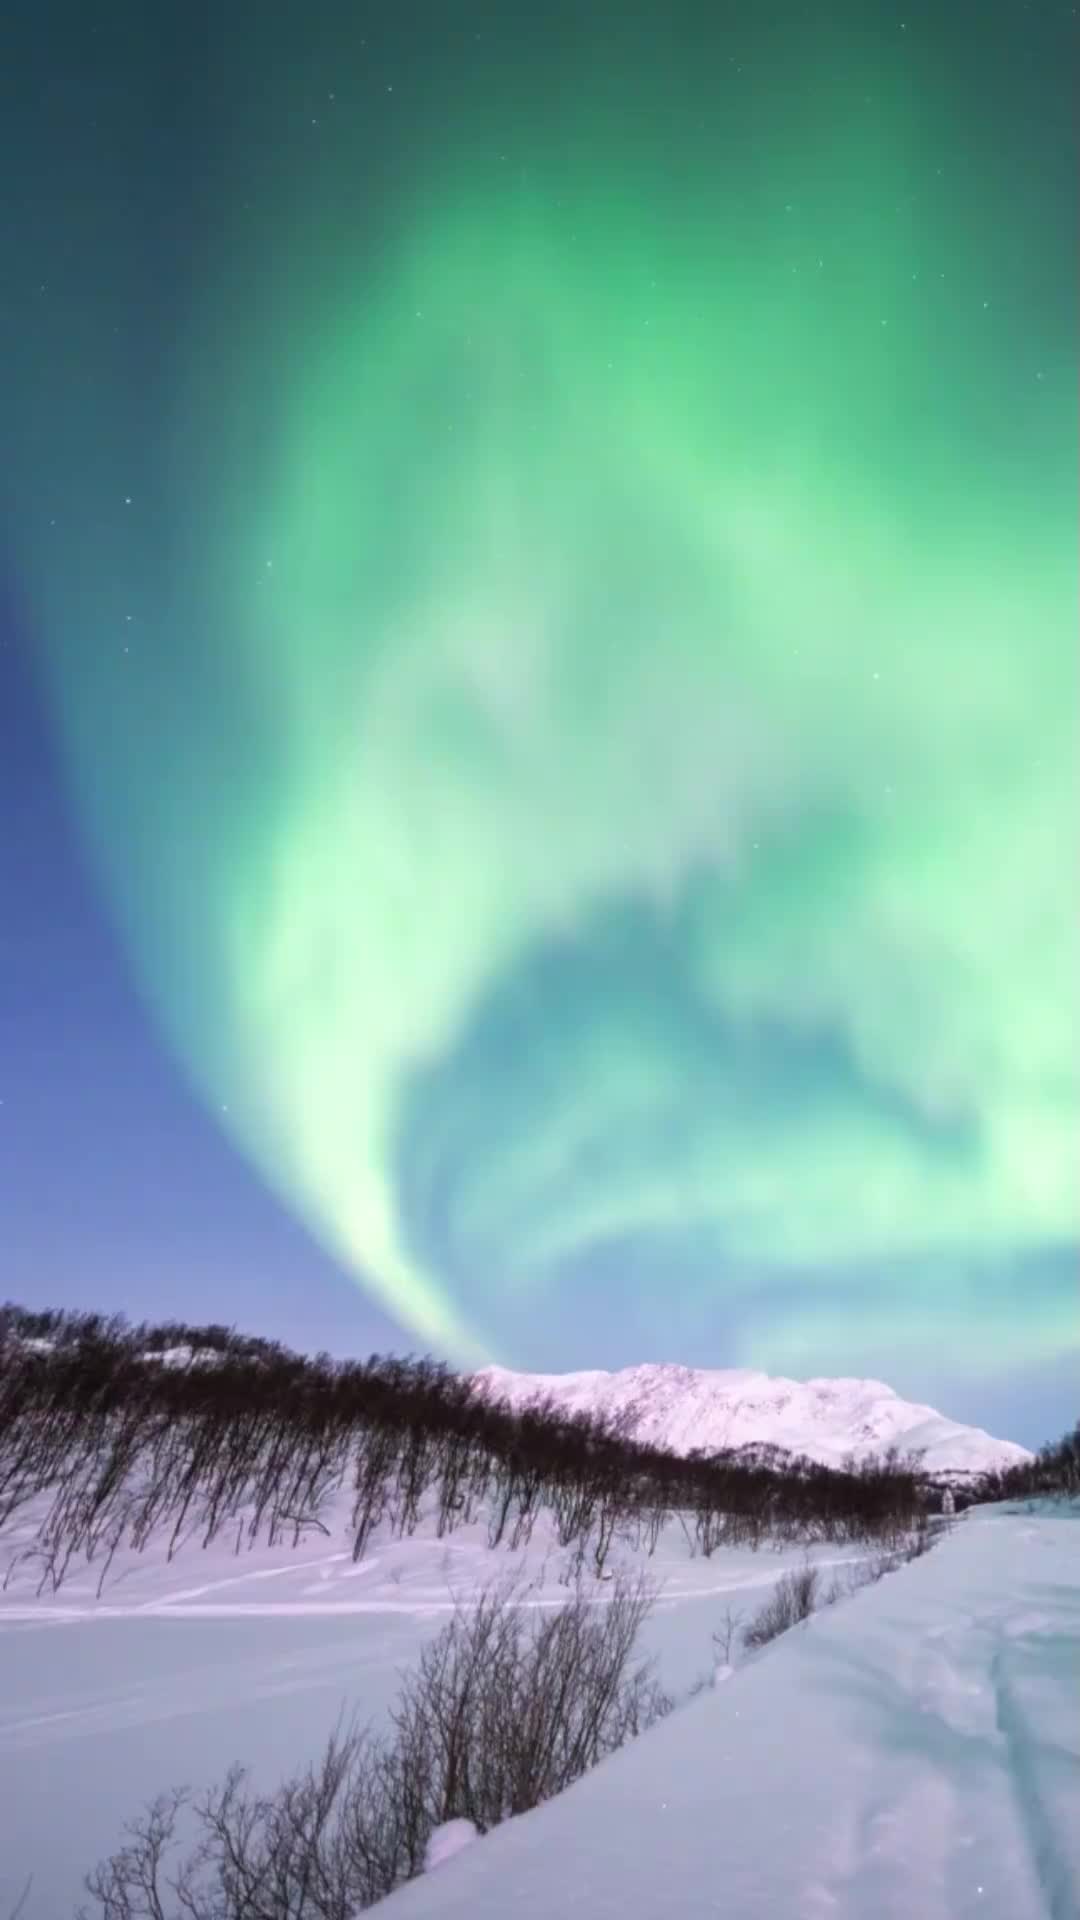 Magical Winter Night with Northern Lights in Norway